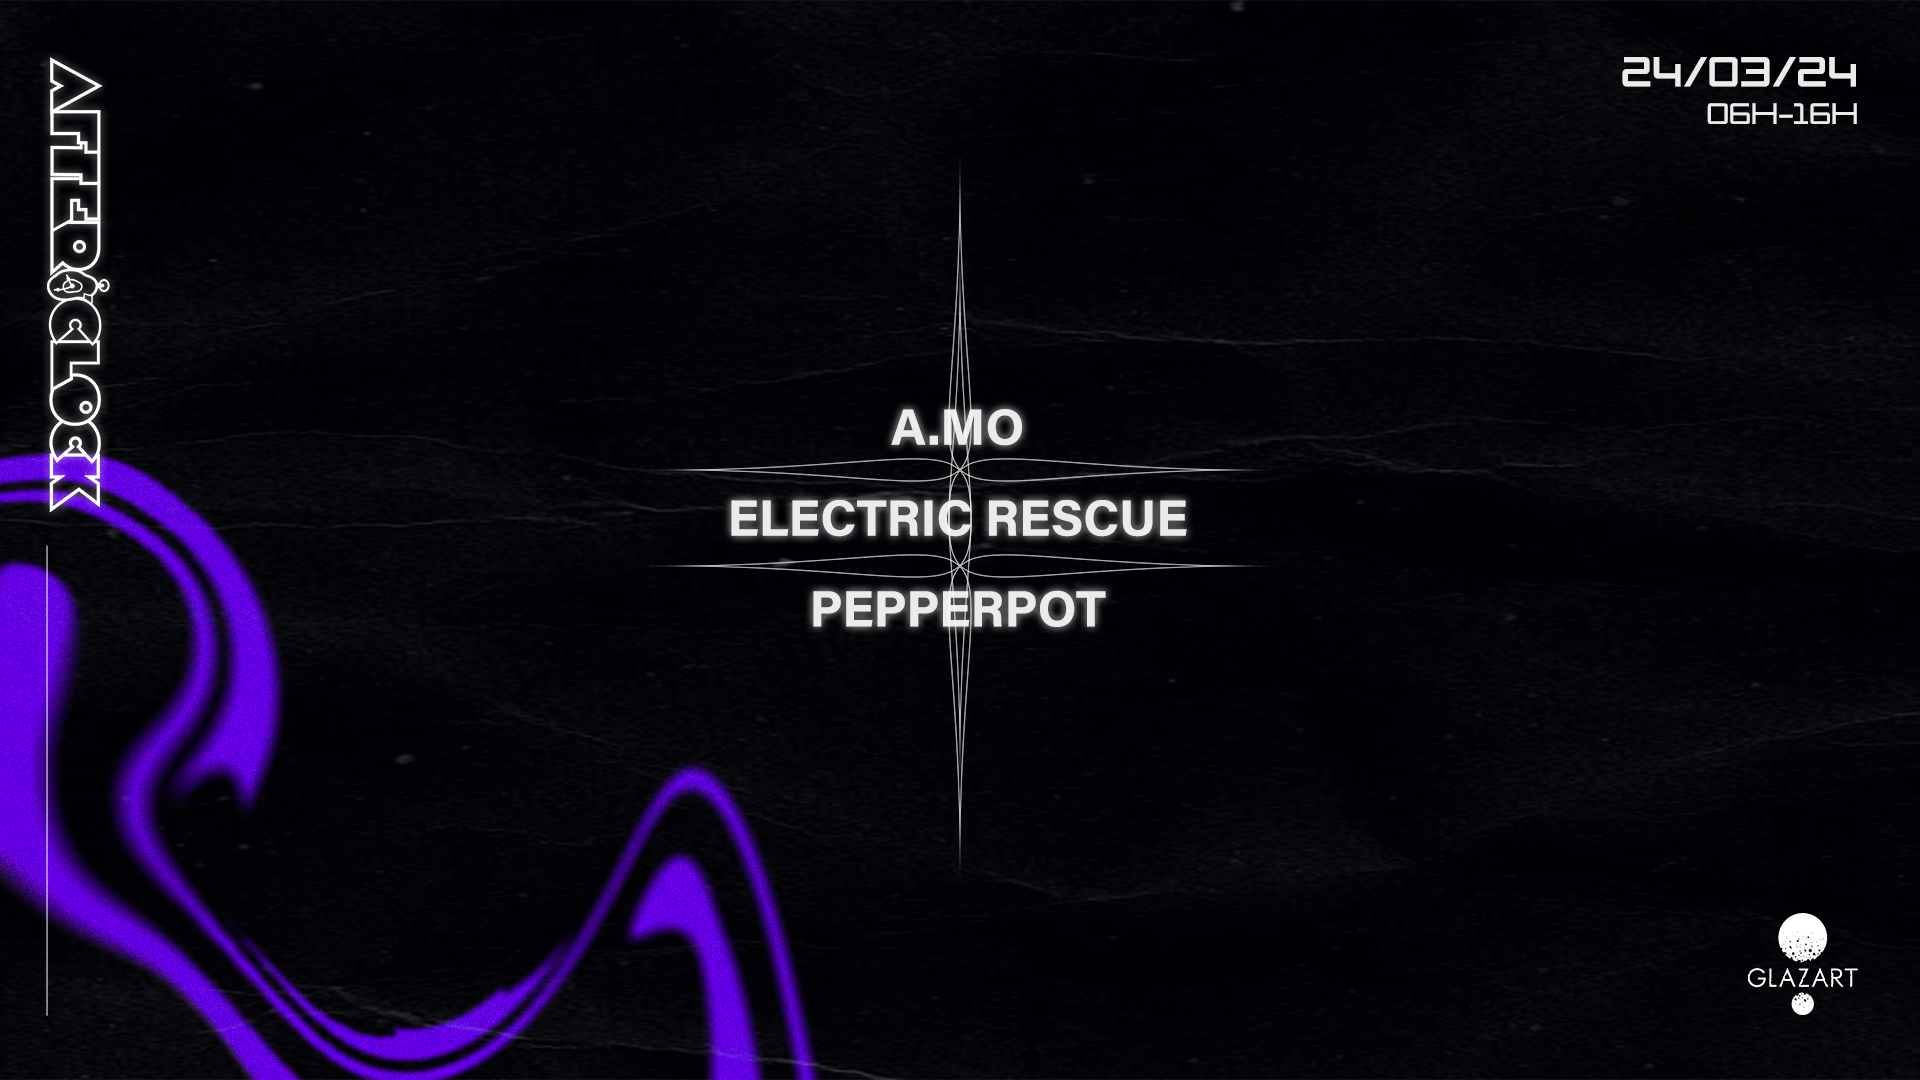 After O'Clock: A.mo, Pepperpot & Electric Rescue - Página frontal